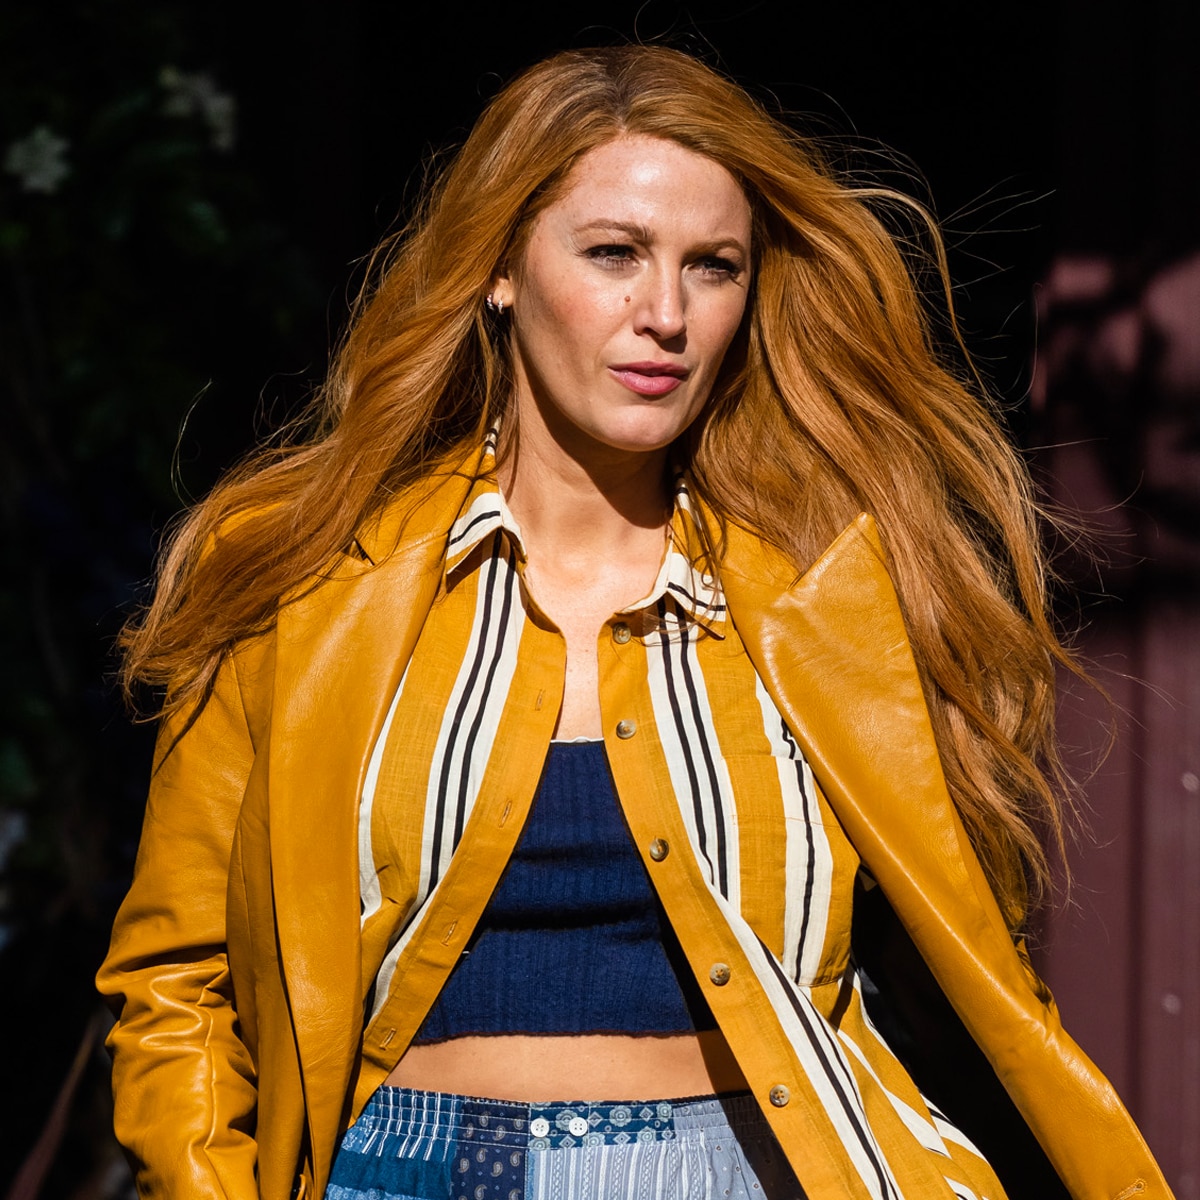 Blake Lively, It Ends With Us, on set